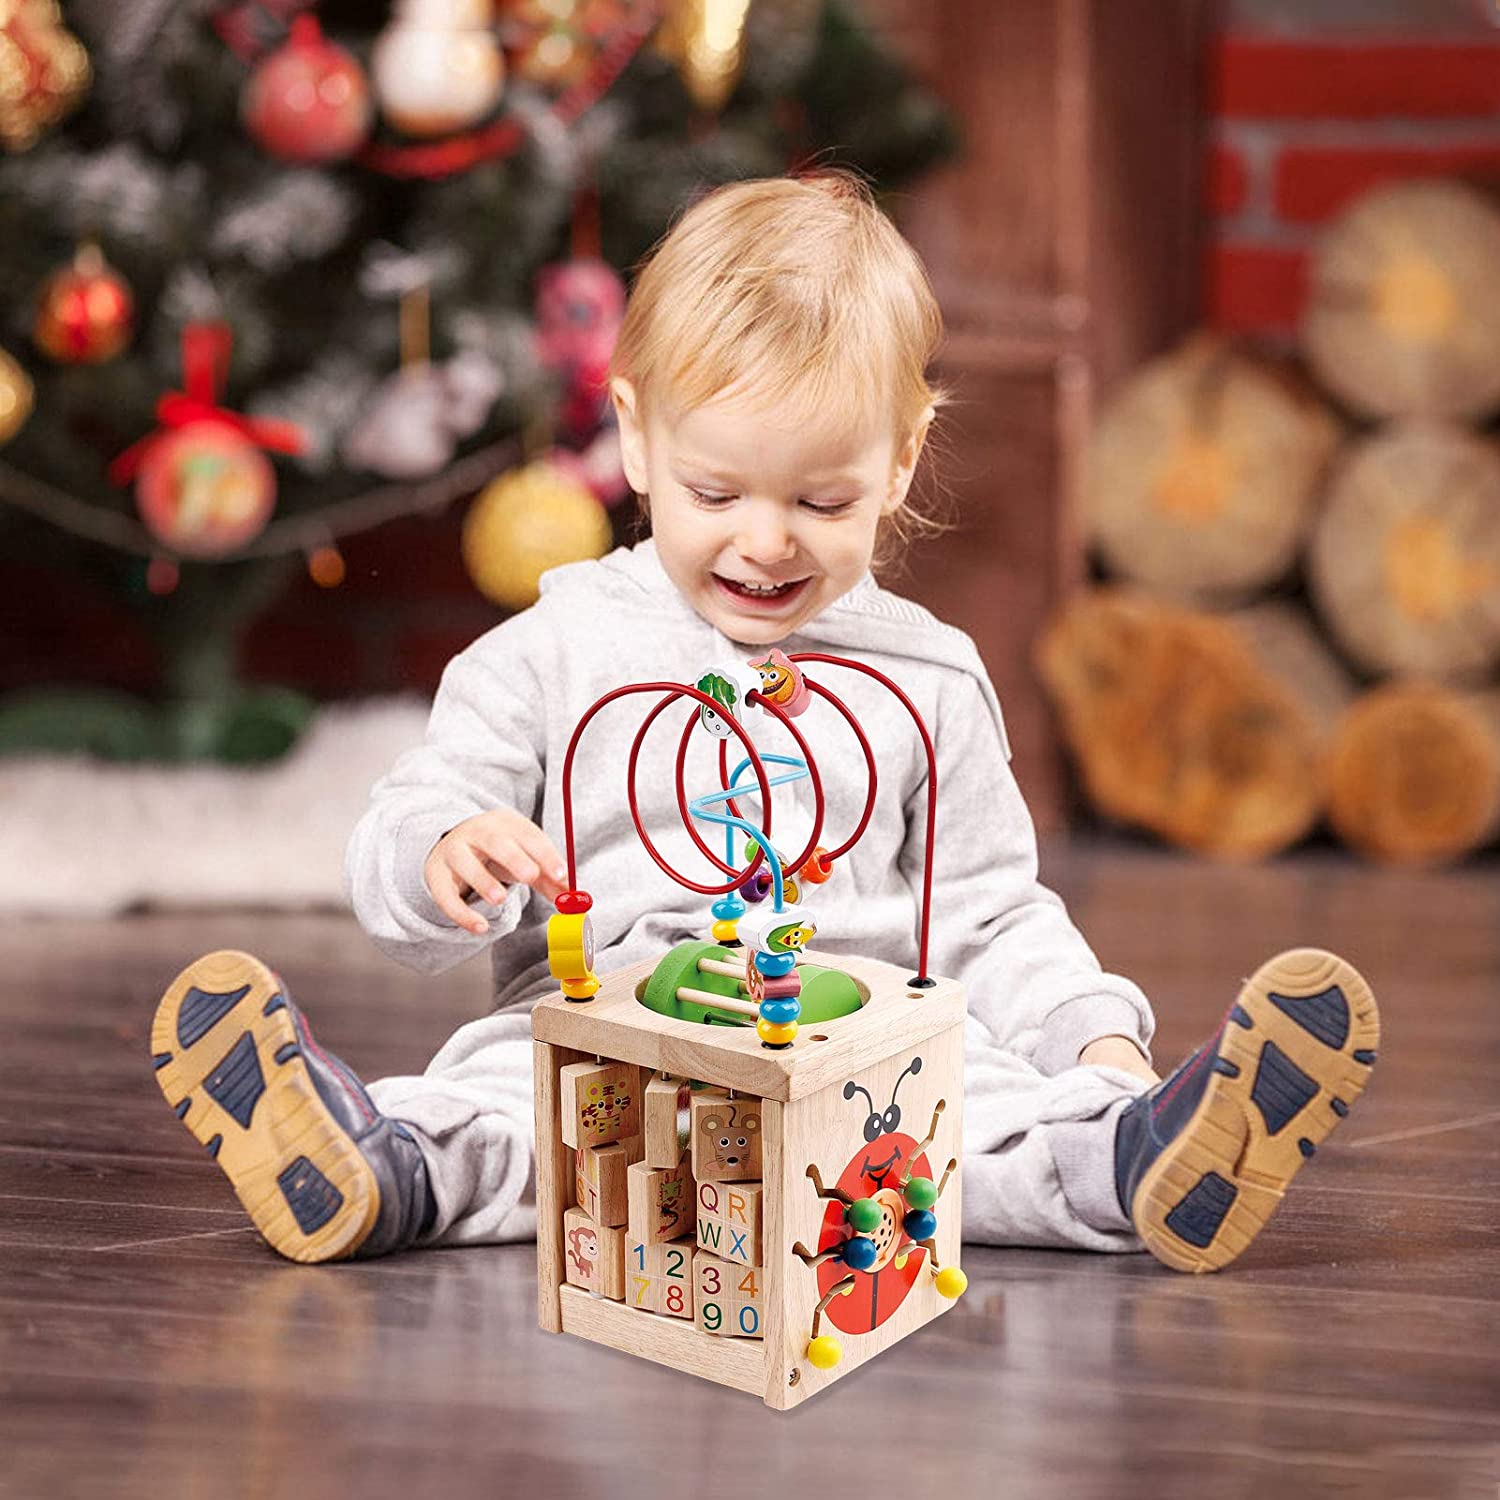 Short Lead Time for Remote Control Car For 3 Year Old - Wooden Activity Cube 6 in 1 Activity Center Toy Baby Bead Maze Toy Educational Wooden Toy Gift for Toddlers and Kids – Ealing